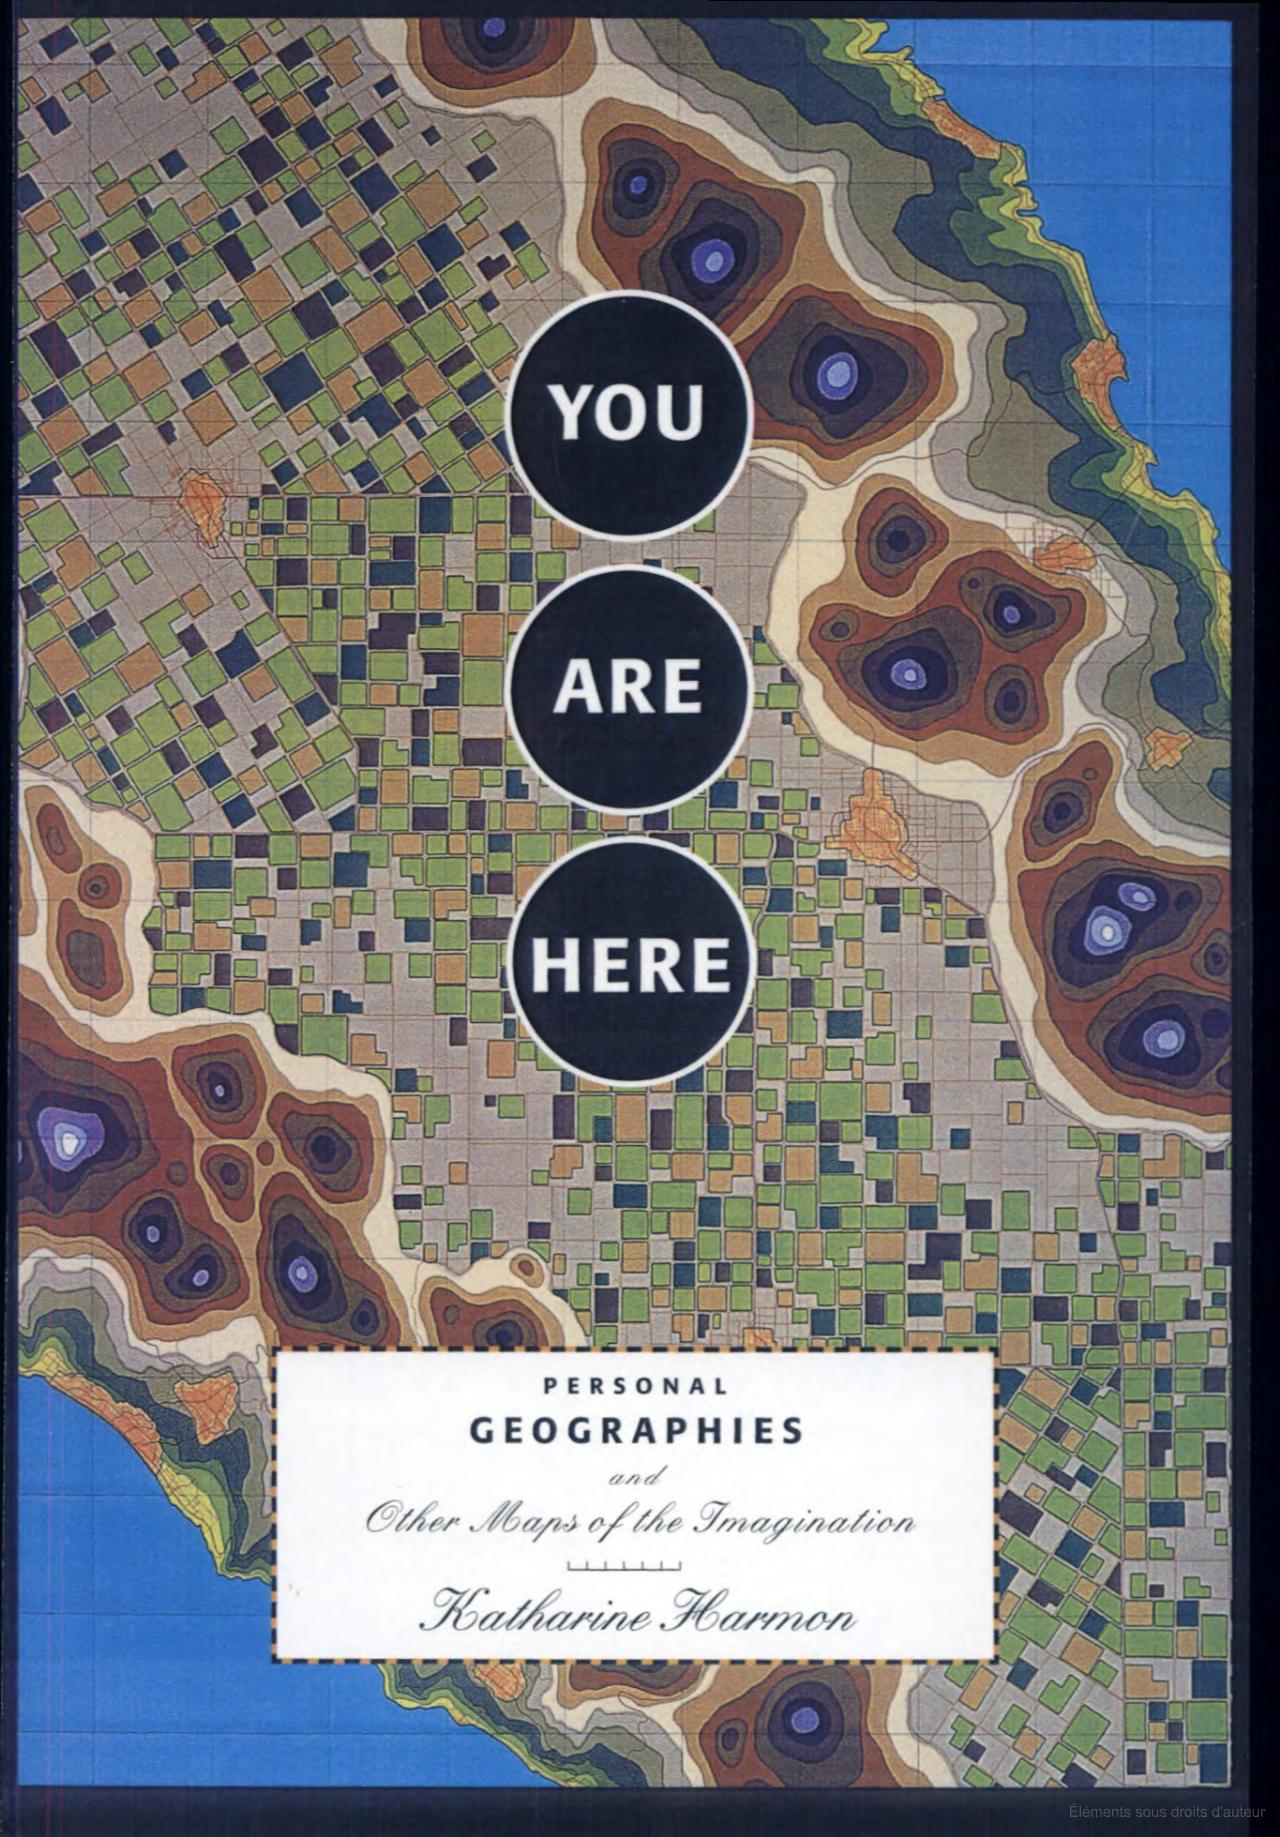 Image You are here : personal geographies and other maps of the imagination